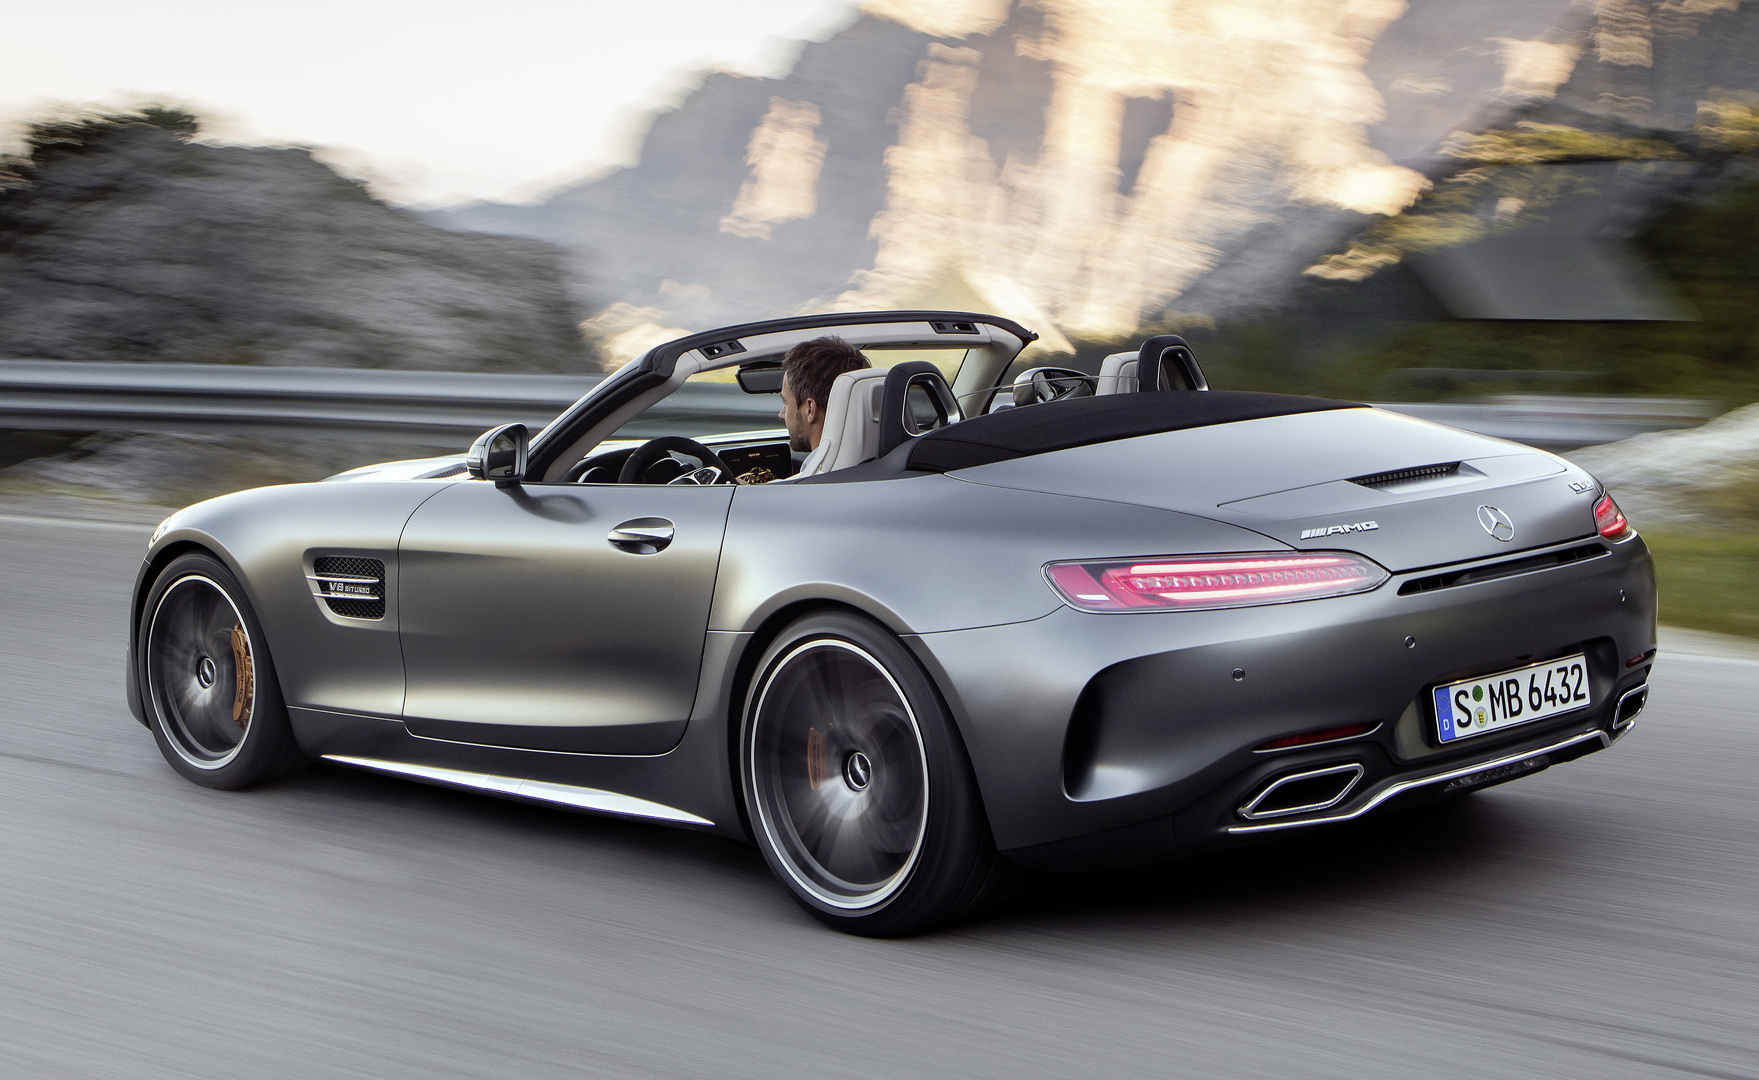 Mercedes Amg Gt C Roadster Revealed As New Drop Top Sports Car Performancedrive